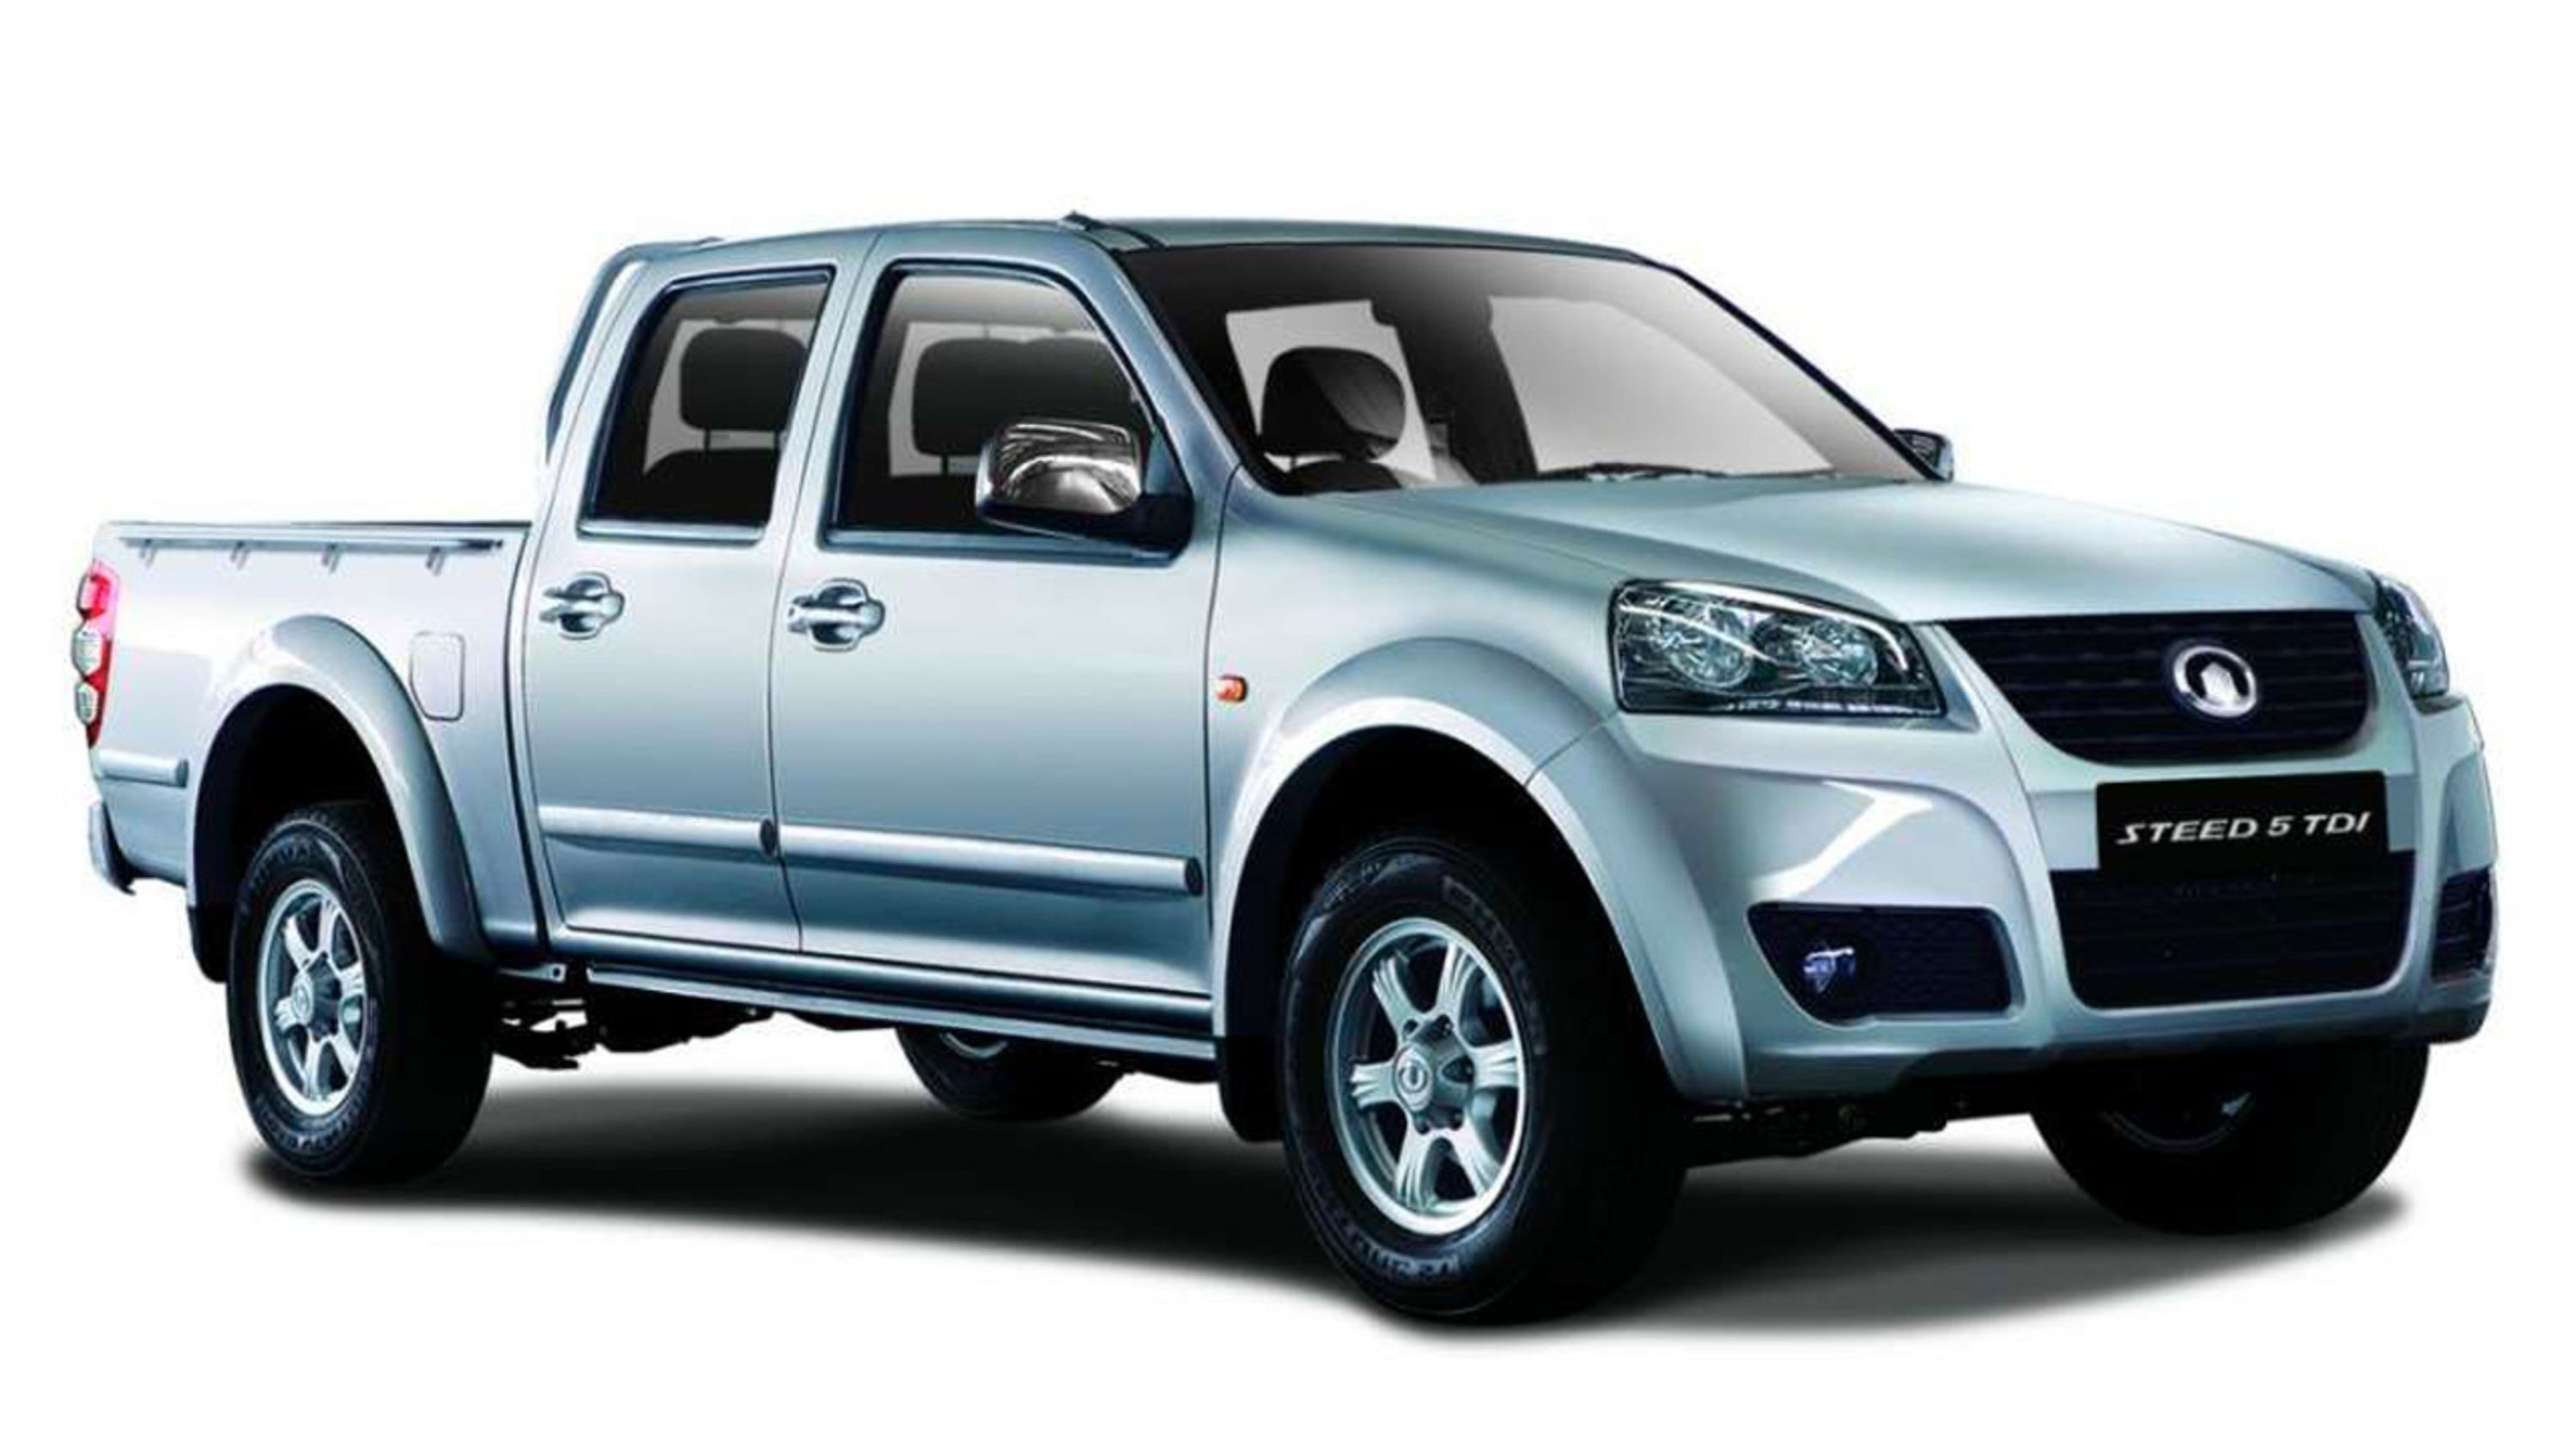 Great Wall Steed Pick-up Steed 5 DC 2.4 4x2 Luxury